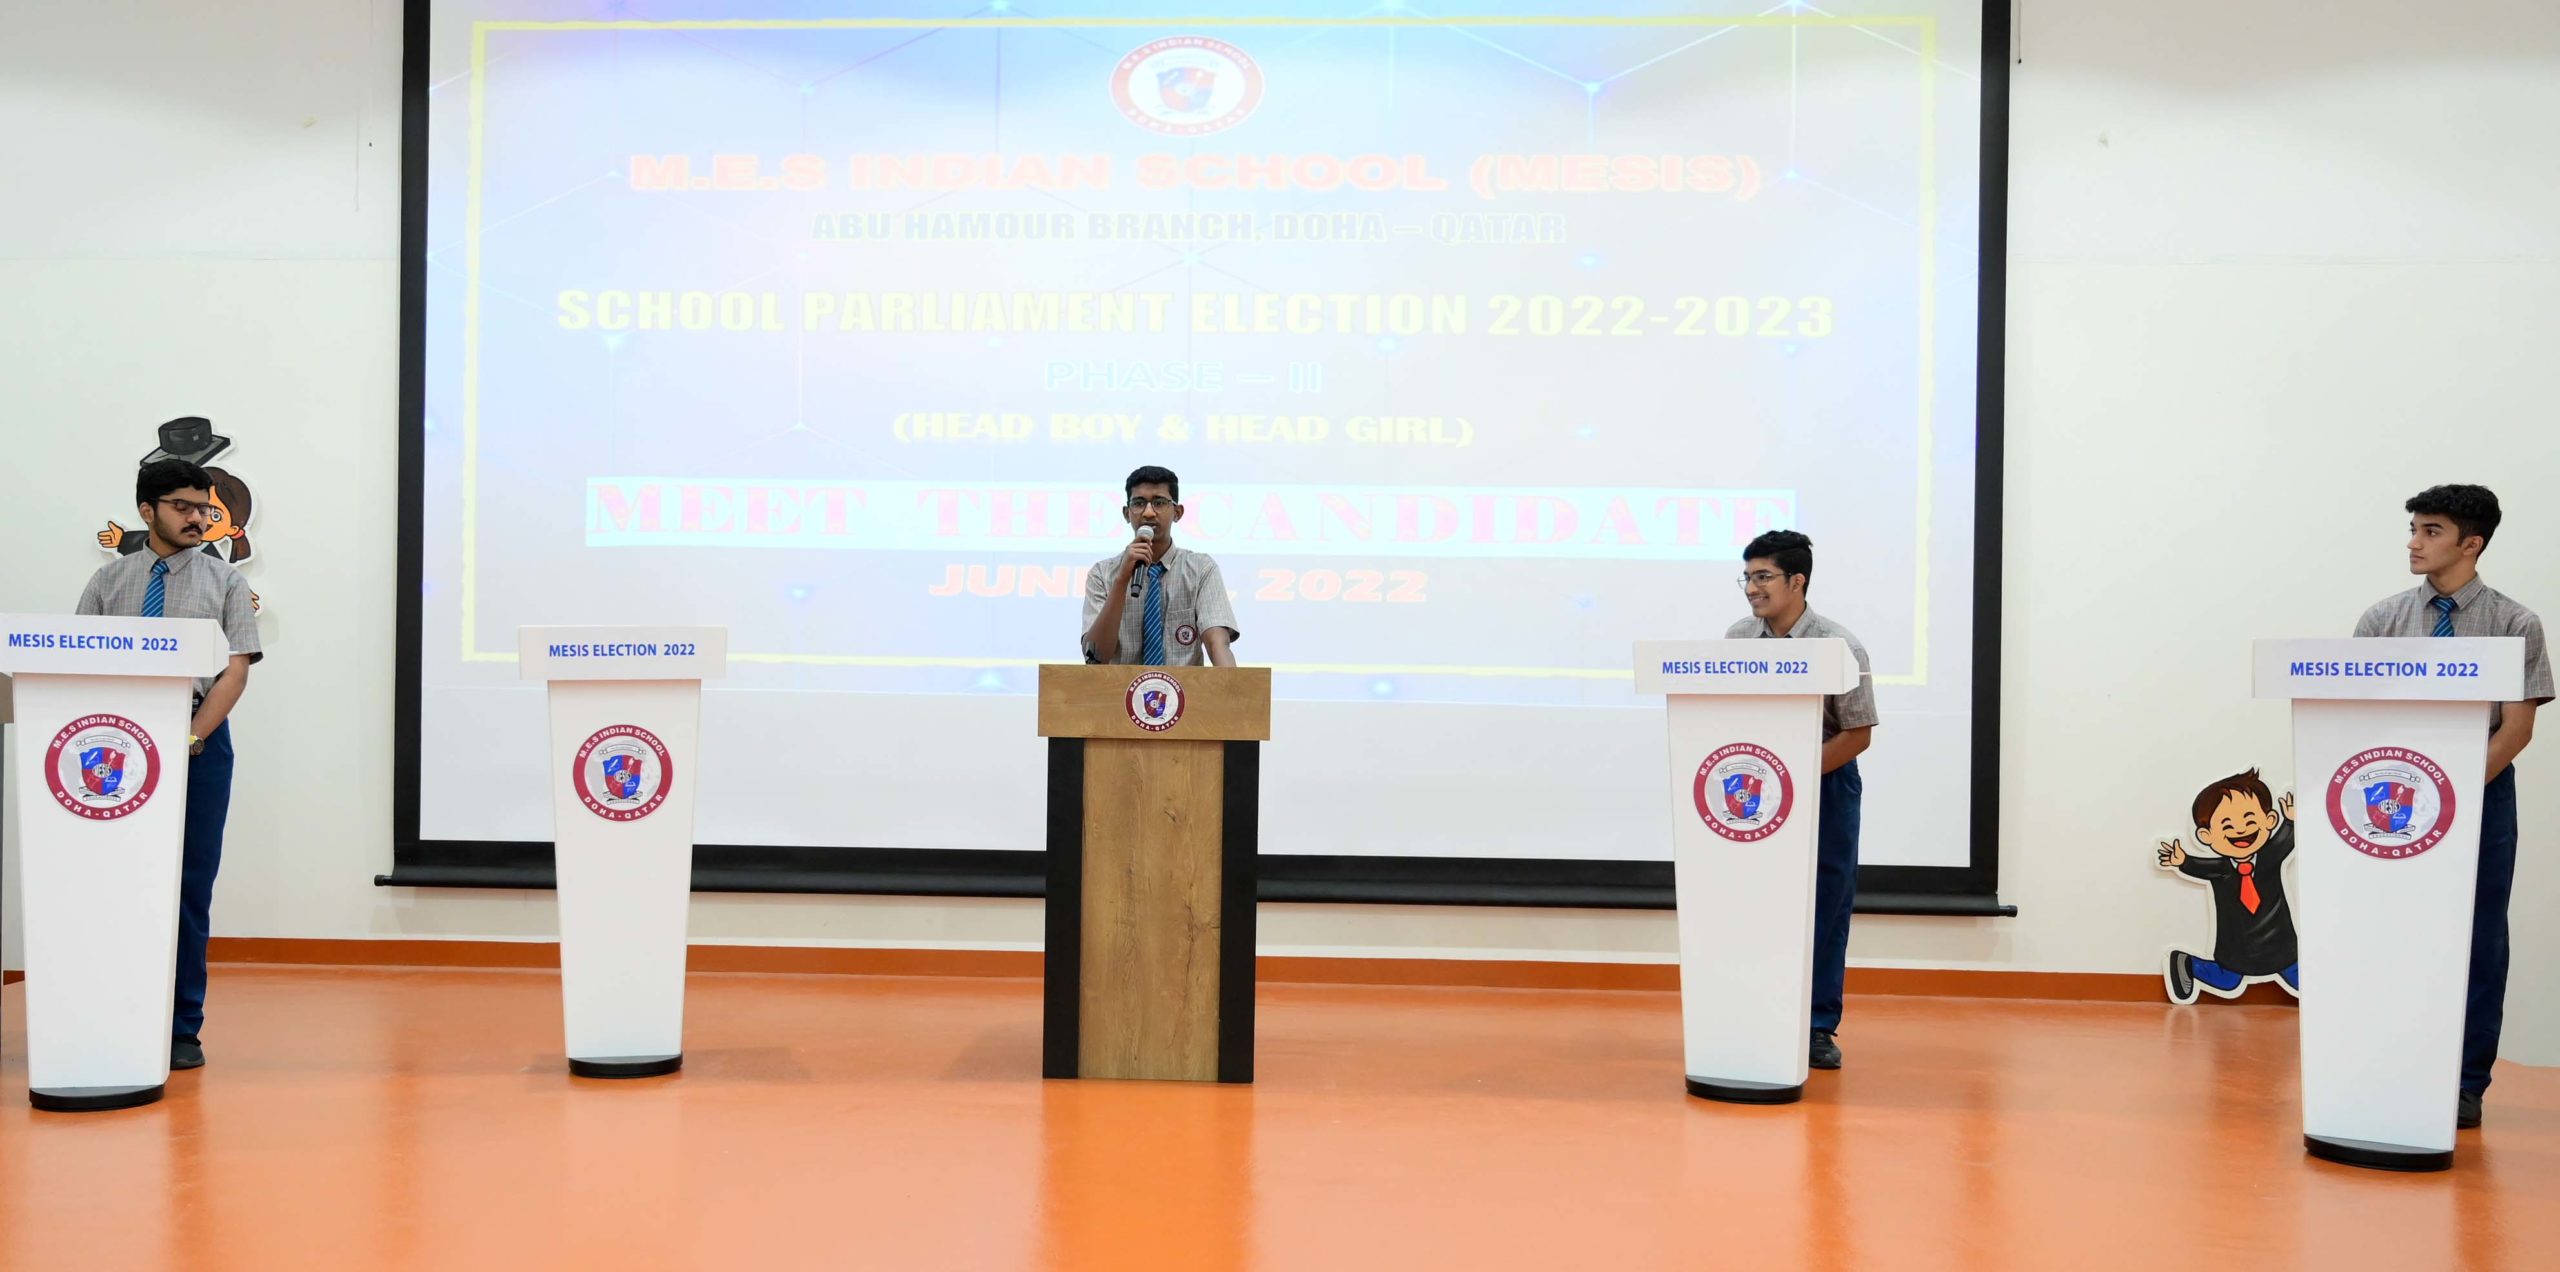 MEET THE CANDIDATES PROGRAMME -SCHOOL PARLIAMENT ELECTION (PHASE II)